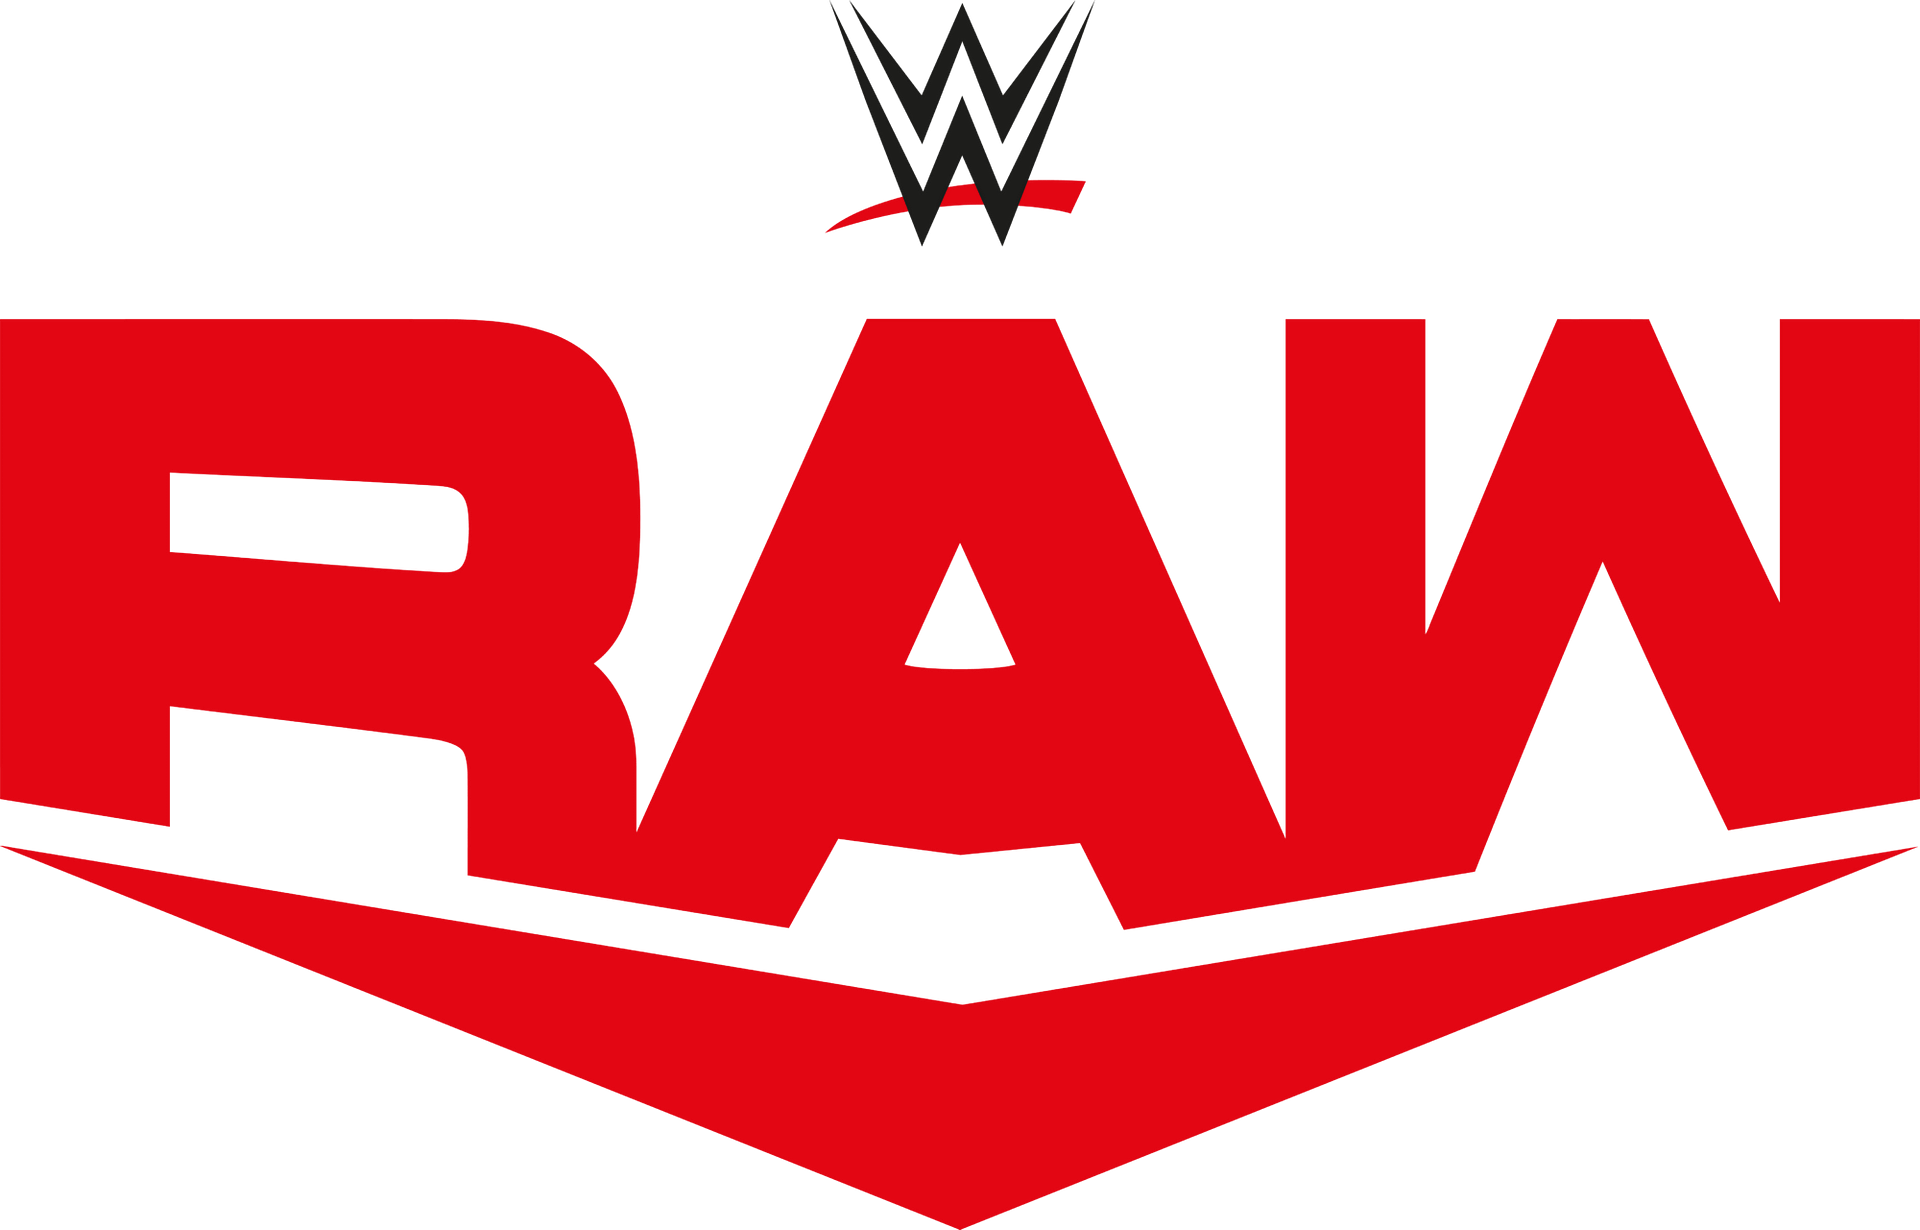 WWE: Raw at Canadian Tire Centre